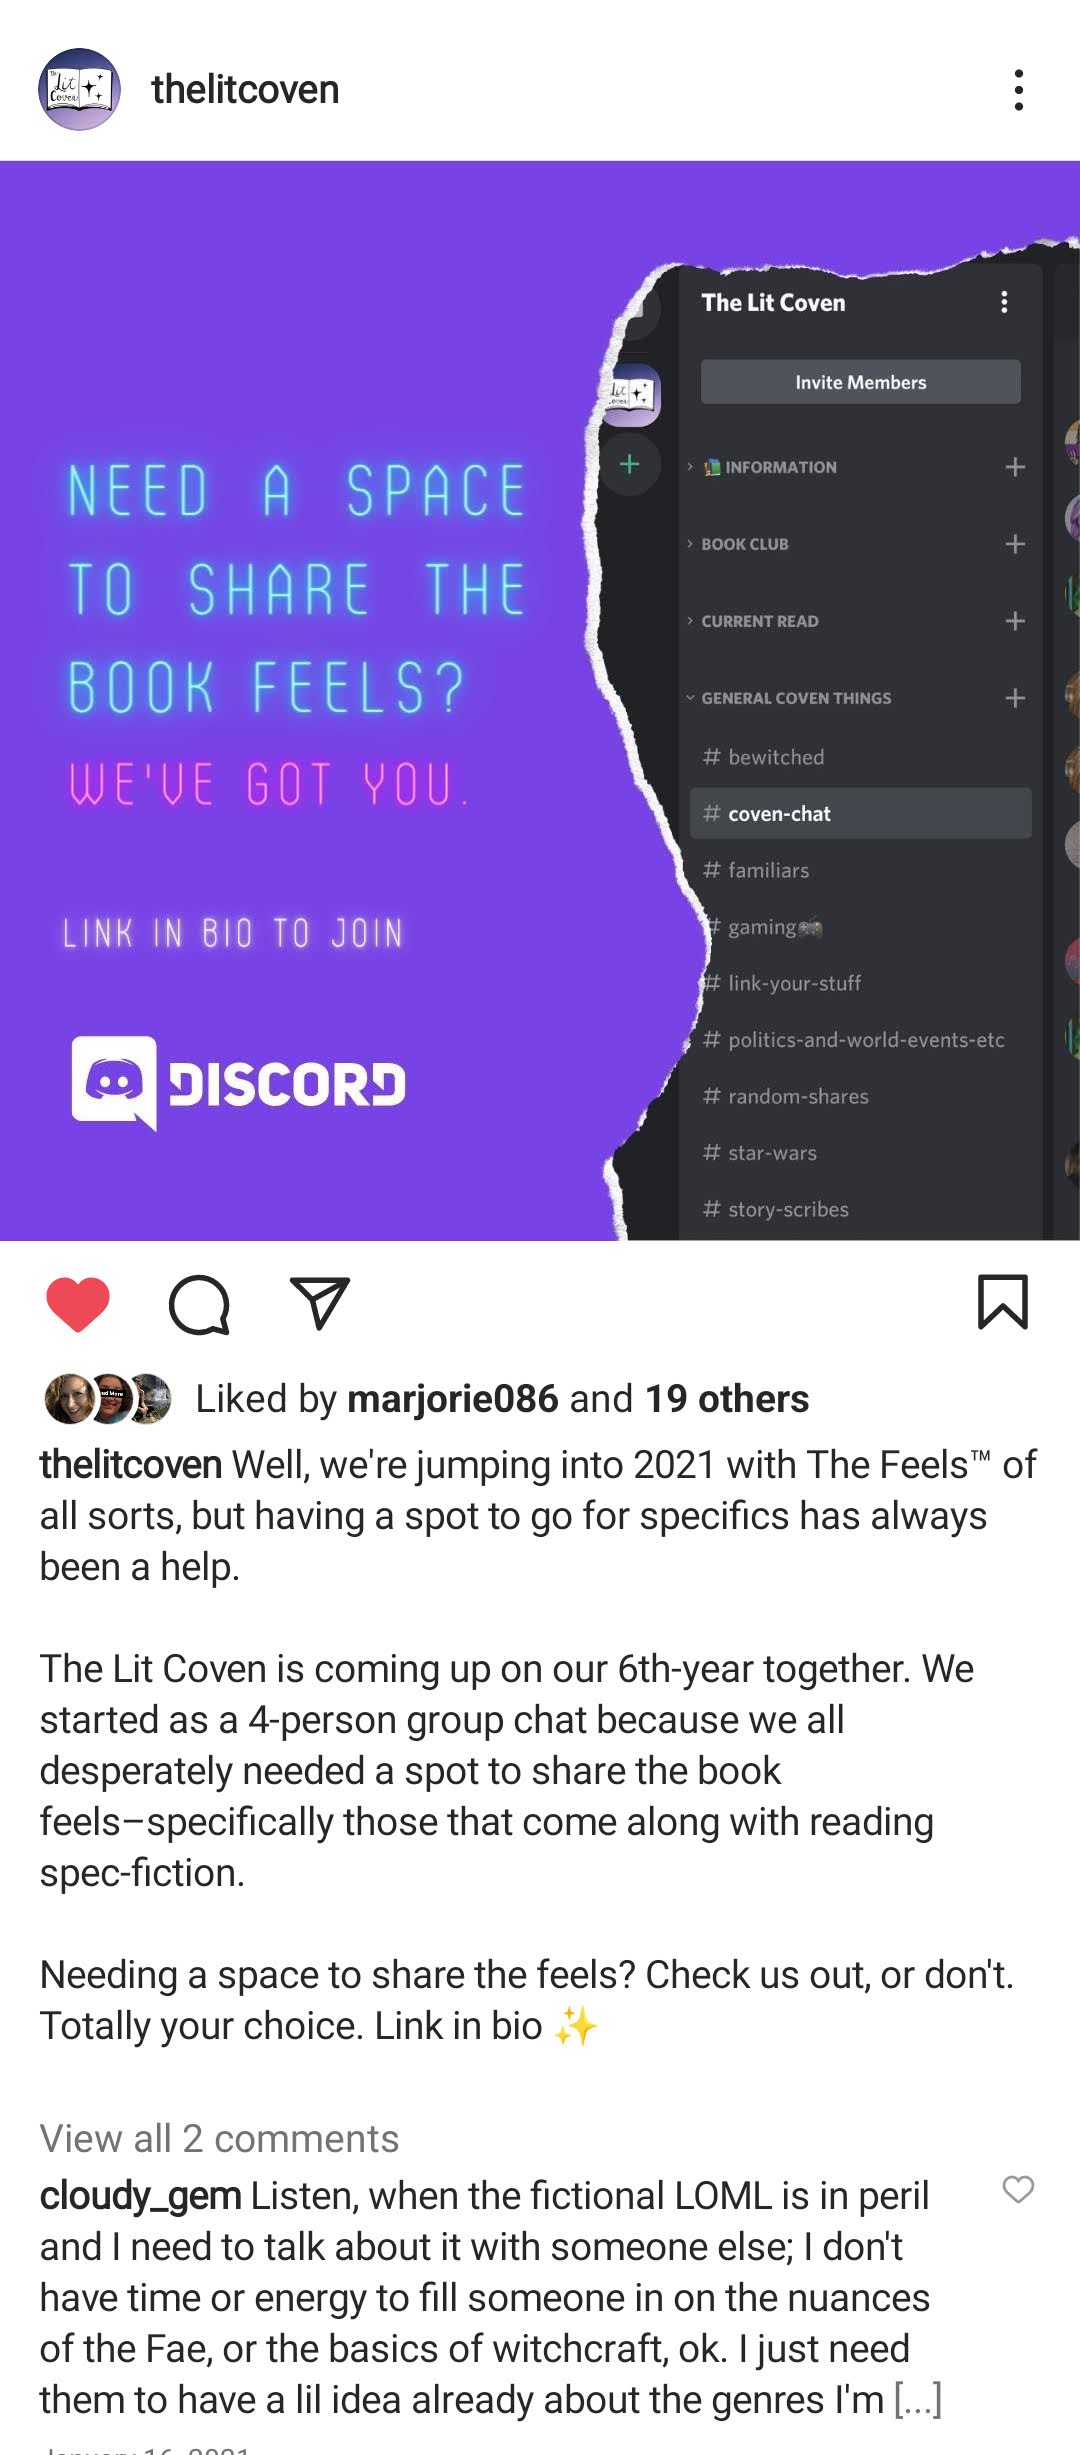 A screenshot of an Instagram post from The Lit Coven with an image that says "Need a space to share the book feels? We've Got You. Link in Bio to join" with the Discord Logo. The caption reads, "Well, we're jumping into 2021 with The Feels of all sorts, but having a spot to go for specifics has always been a help. The Lit Coven is coming up on our 6th-year together."